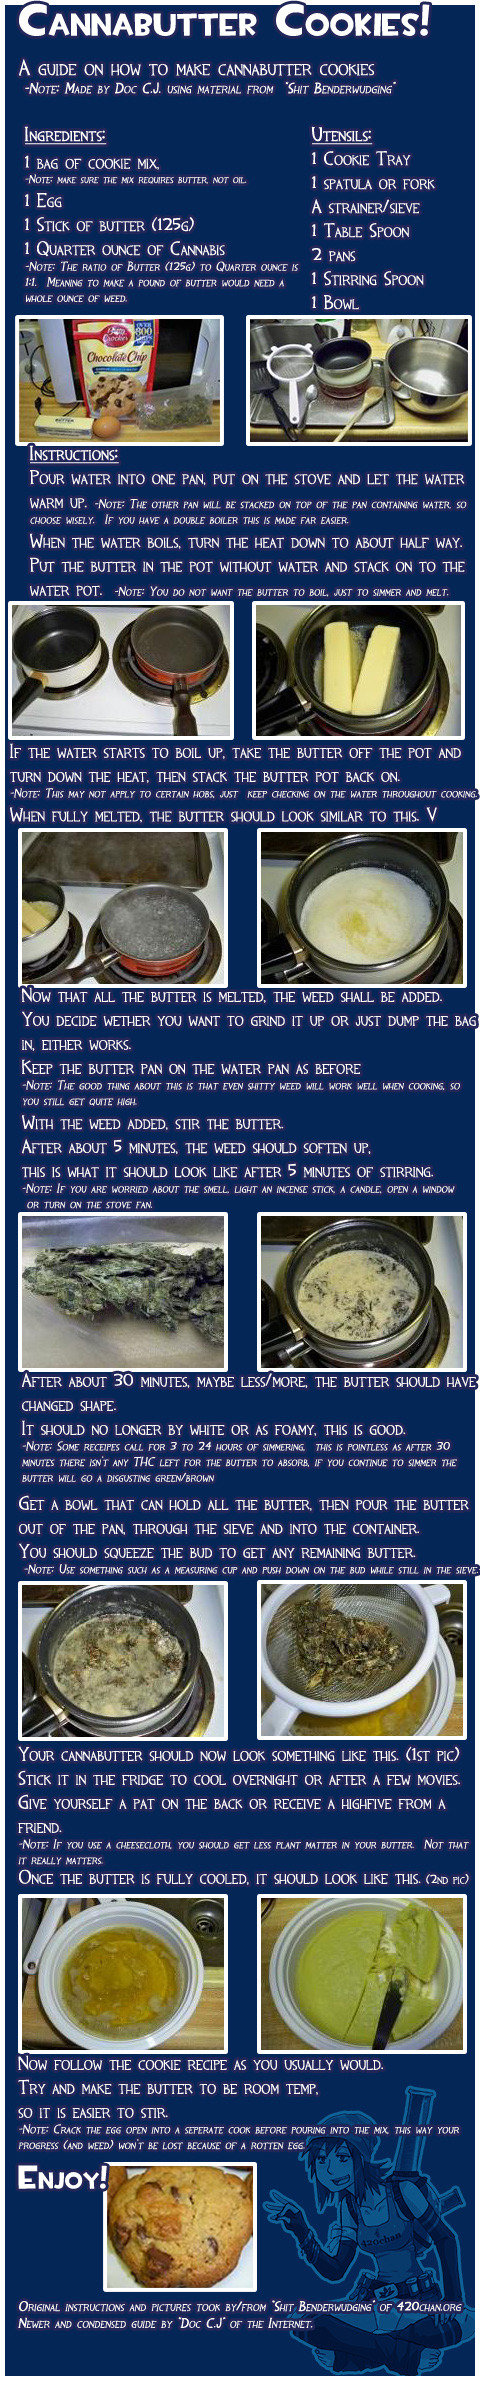 how to cannabutter. yes. CANNABUTTER COOKIES’! A GUIDE ON HURT TC) MAKE CANNABIS IER COOKIES Nora. y MADE Er DEE , MIME . EHCJM Turr By. . ' I BM or MIX, I UPDA